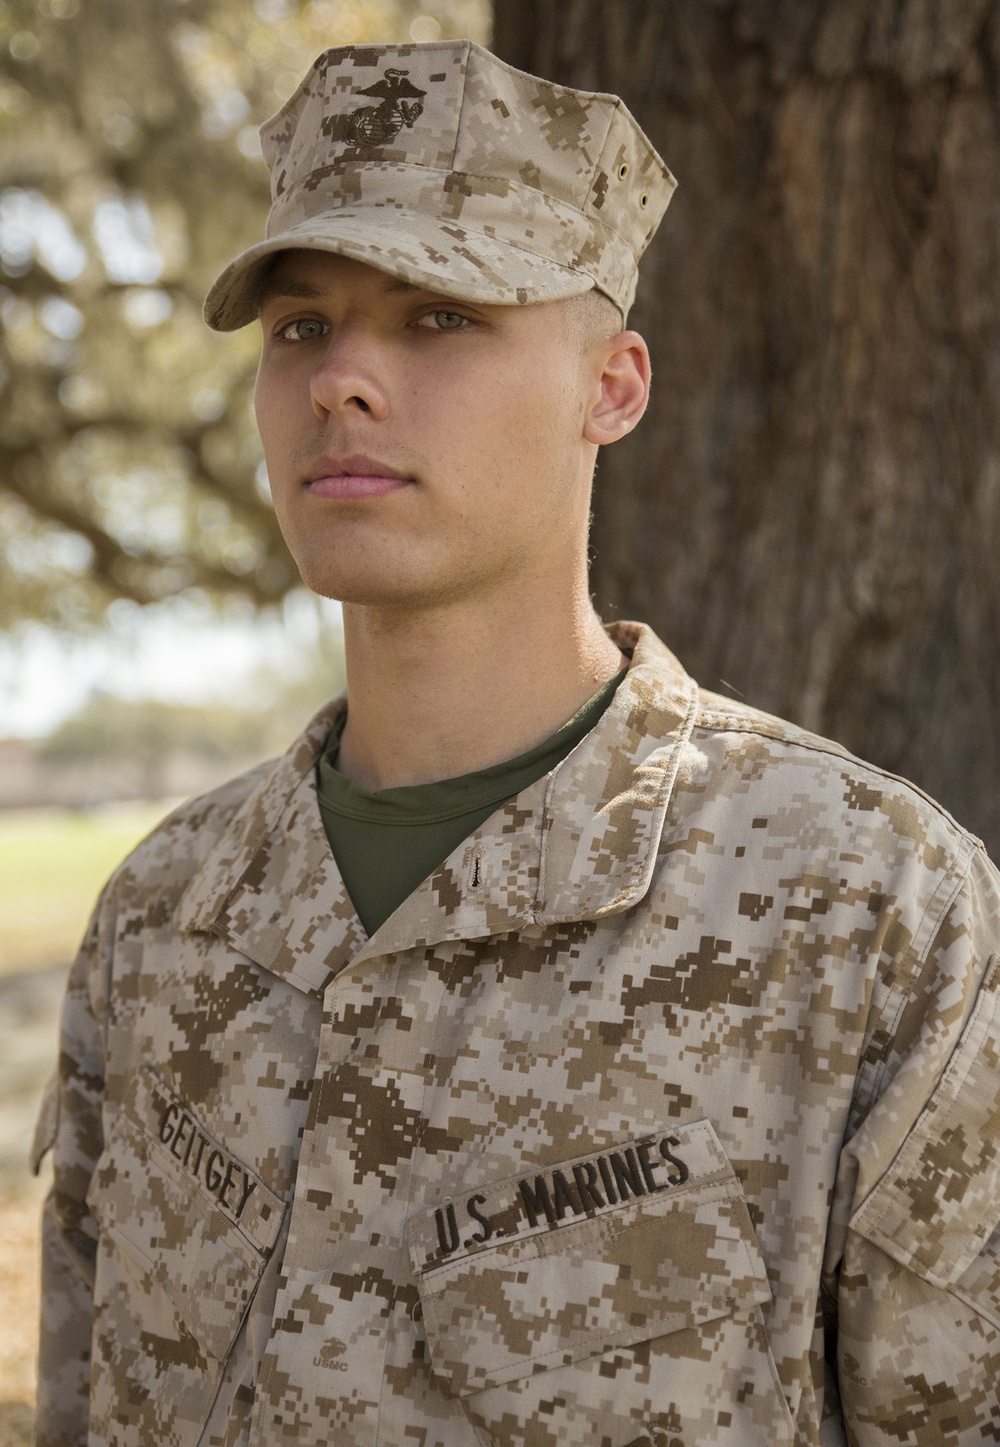 Louisville, Ky., native training at Parris Island to become U.S. Marine